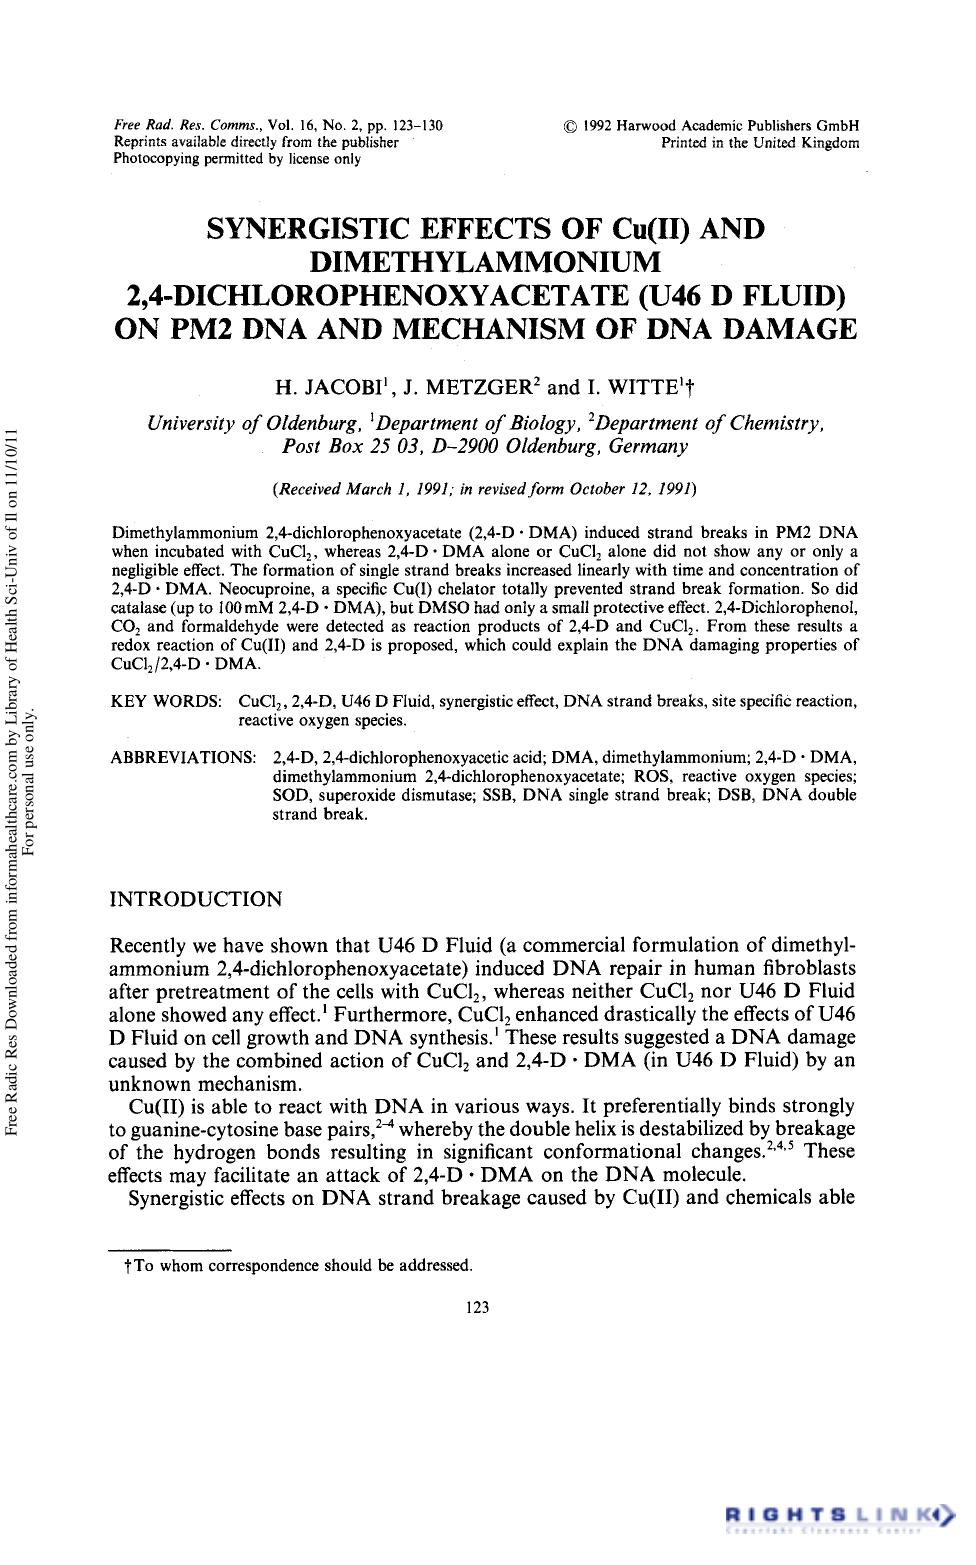 Synergistic Effects of Cu(II) and Dimethylammonium 2,4-Dichlorophenoxyacetate (U46 D Fluid) on PM2 DNA and Mechanism of Dna Damage by H. Jacobi1 J. Metzger2 & I. Witte1†